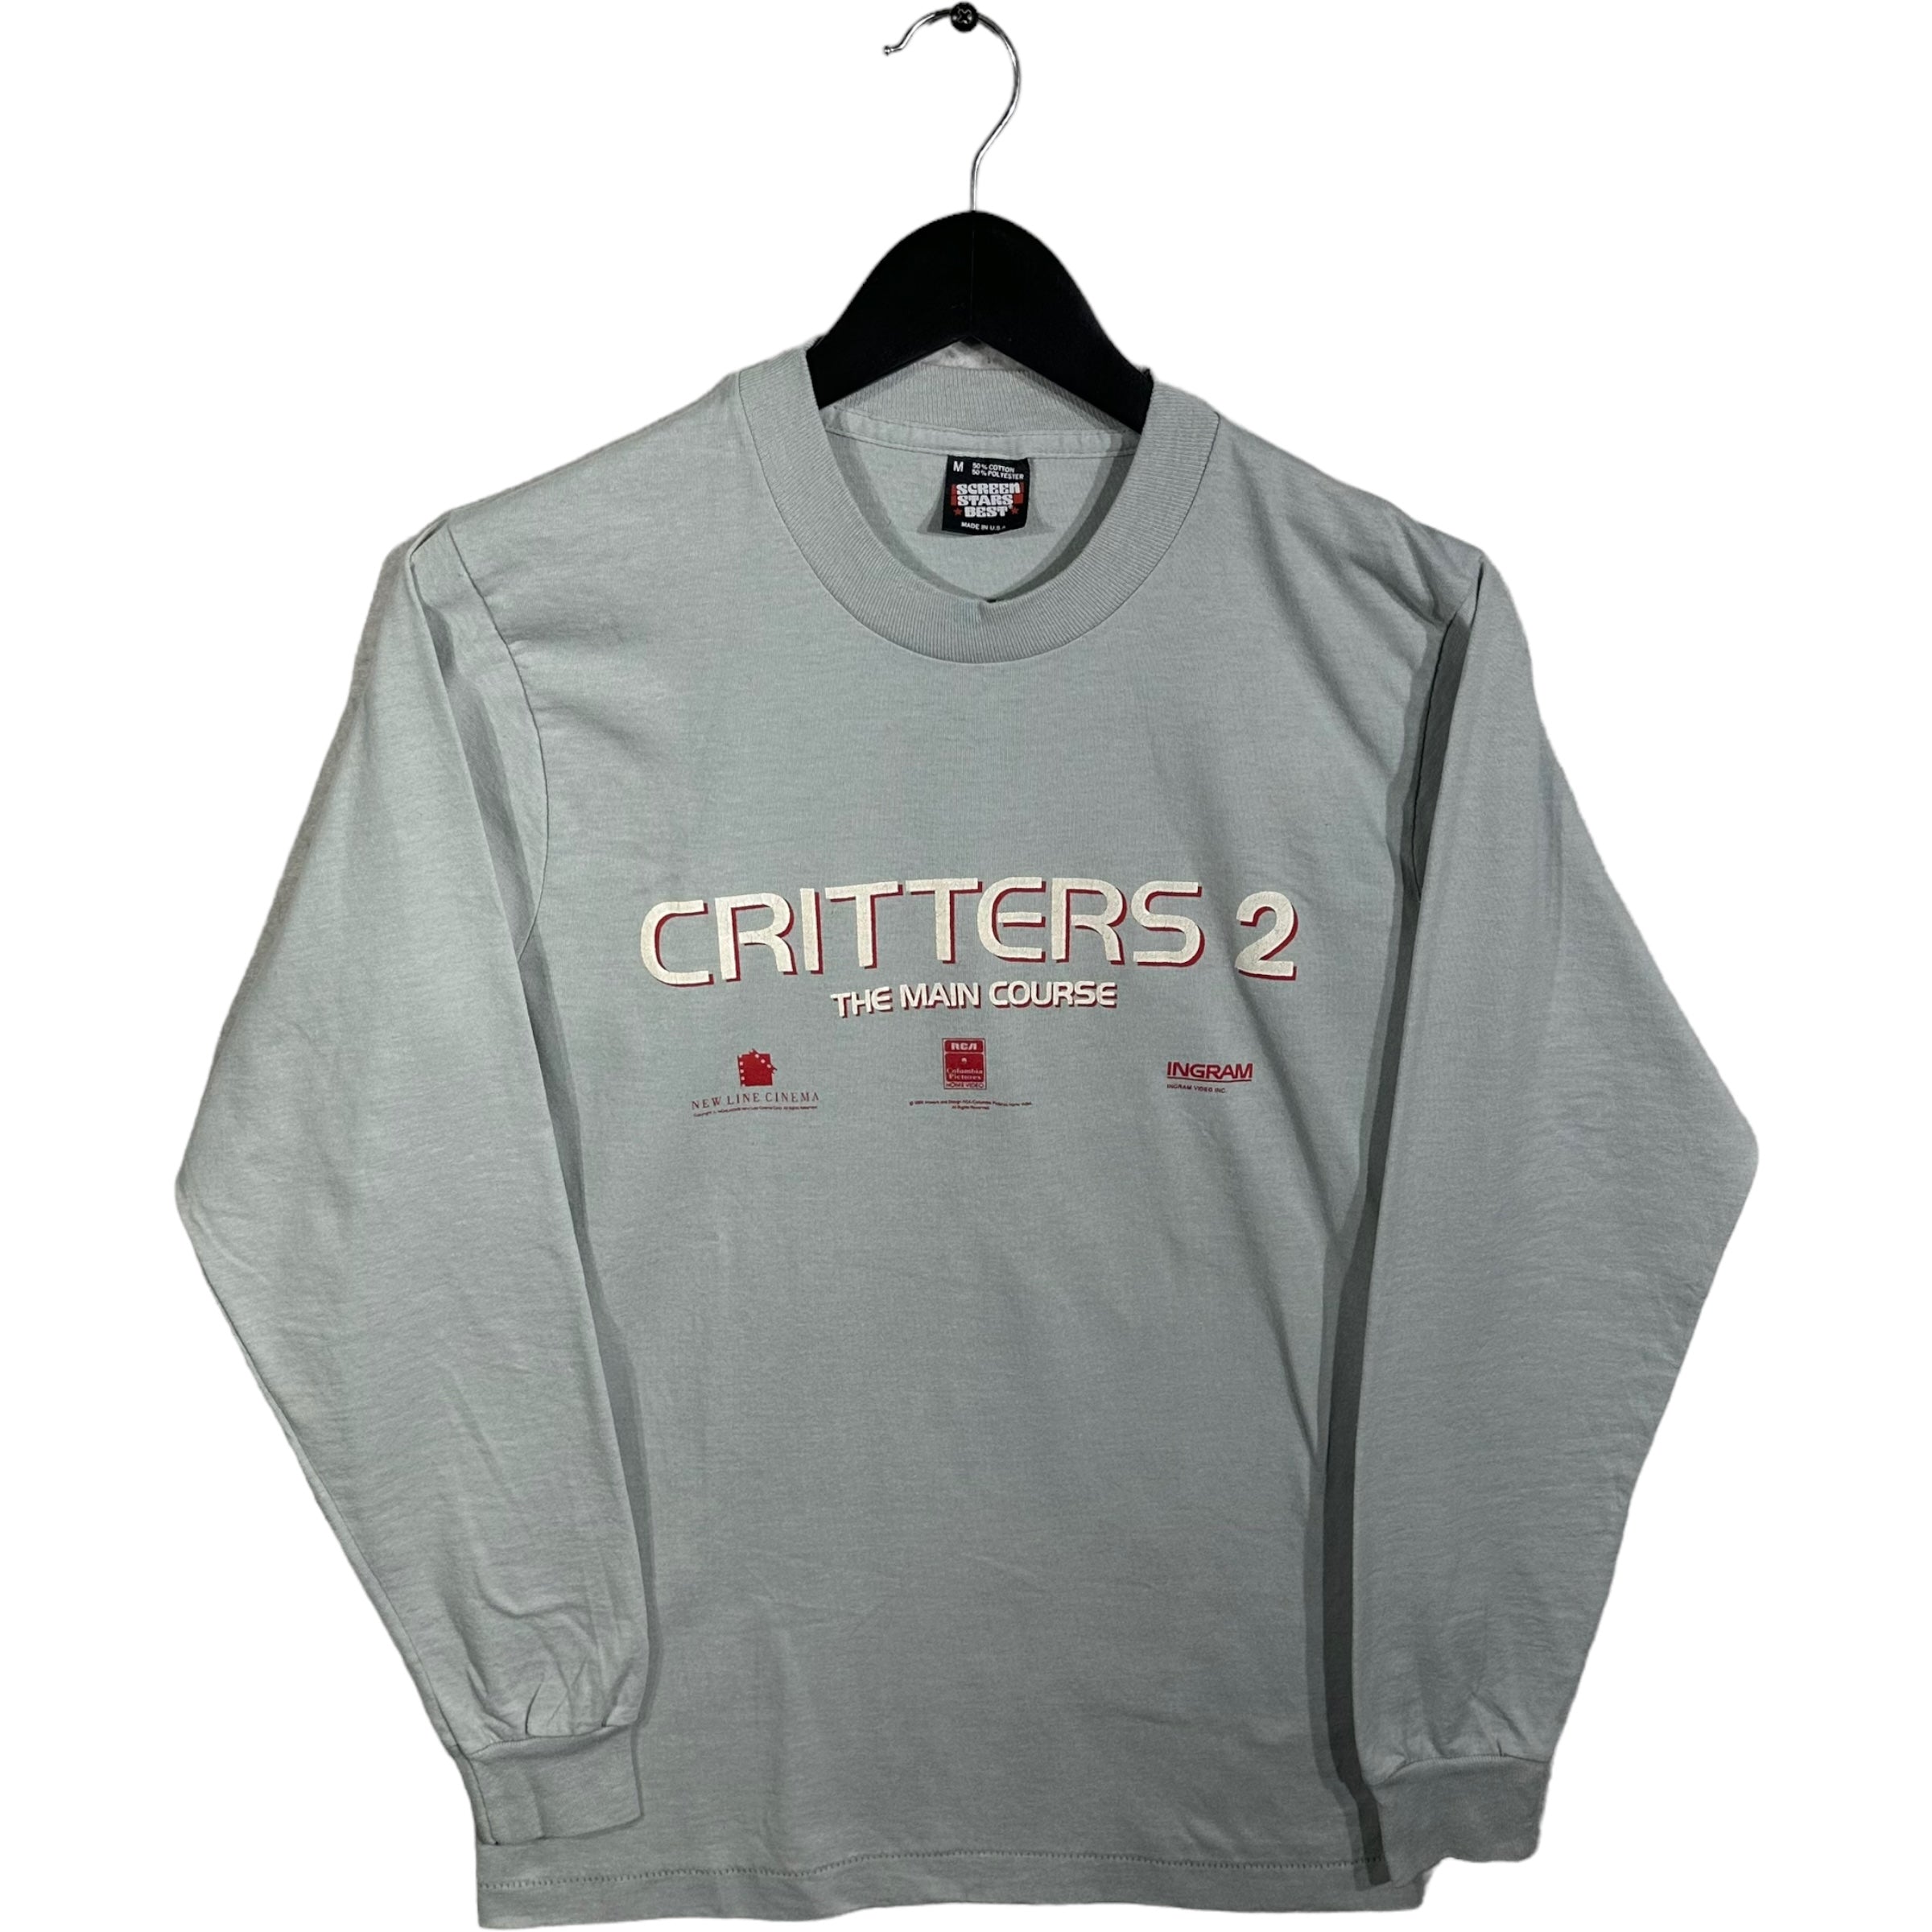 Vintage Critters 2 The Main Course Long Sleeve